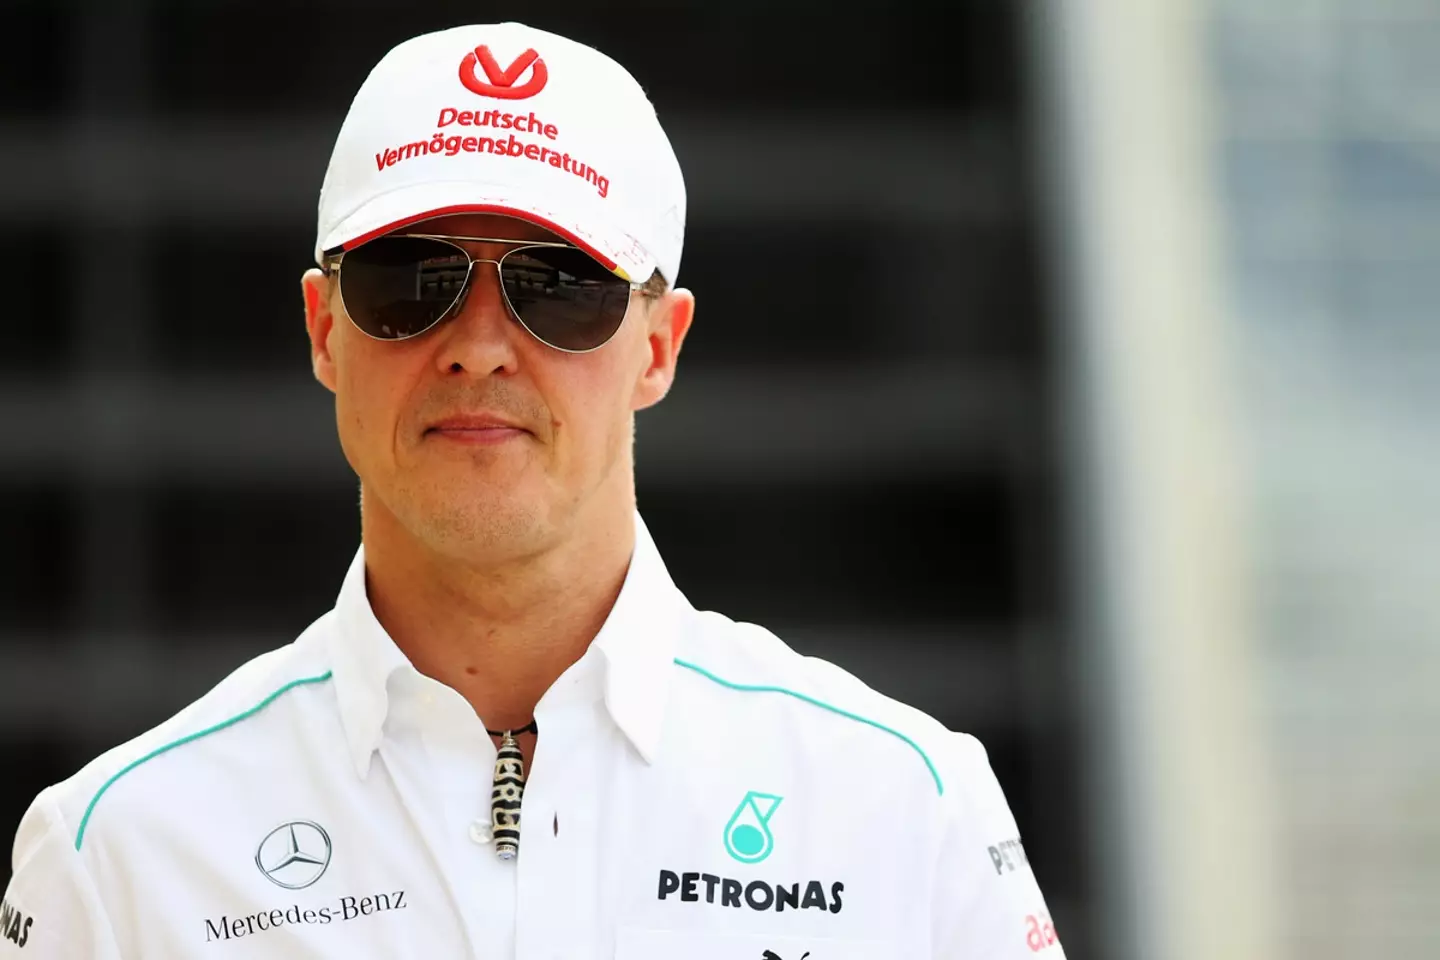 Michael Schumacher was injured in a skiing accident in 2013.